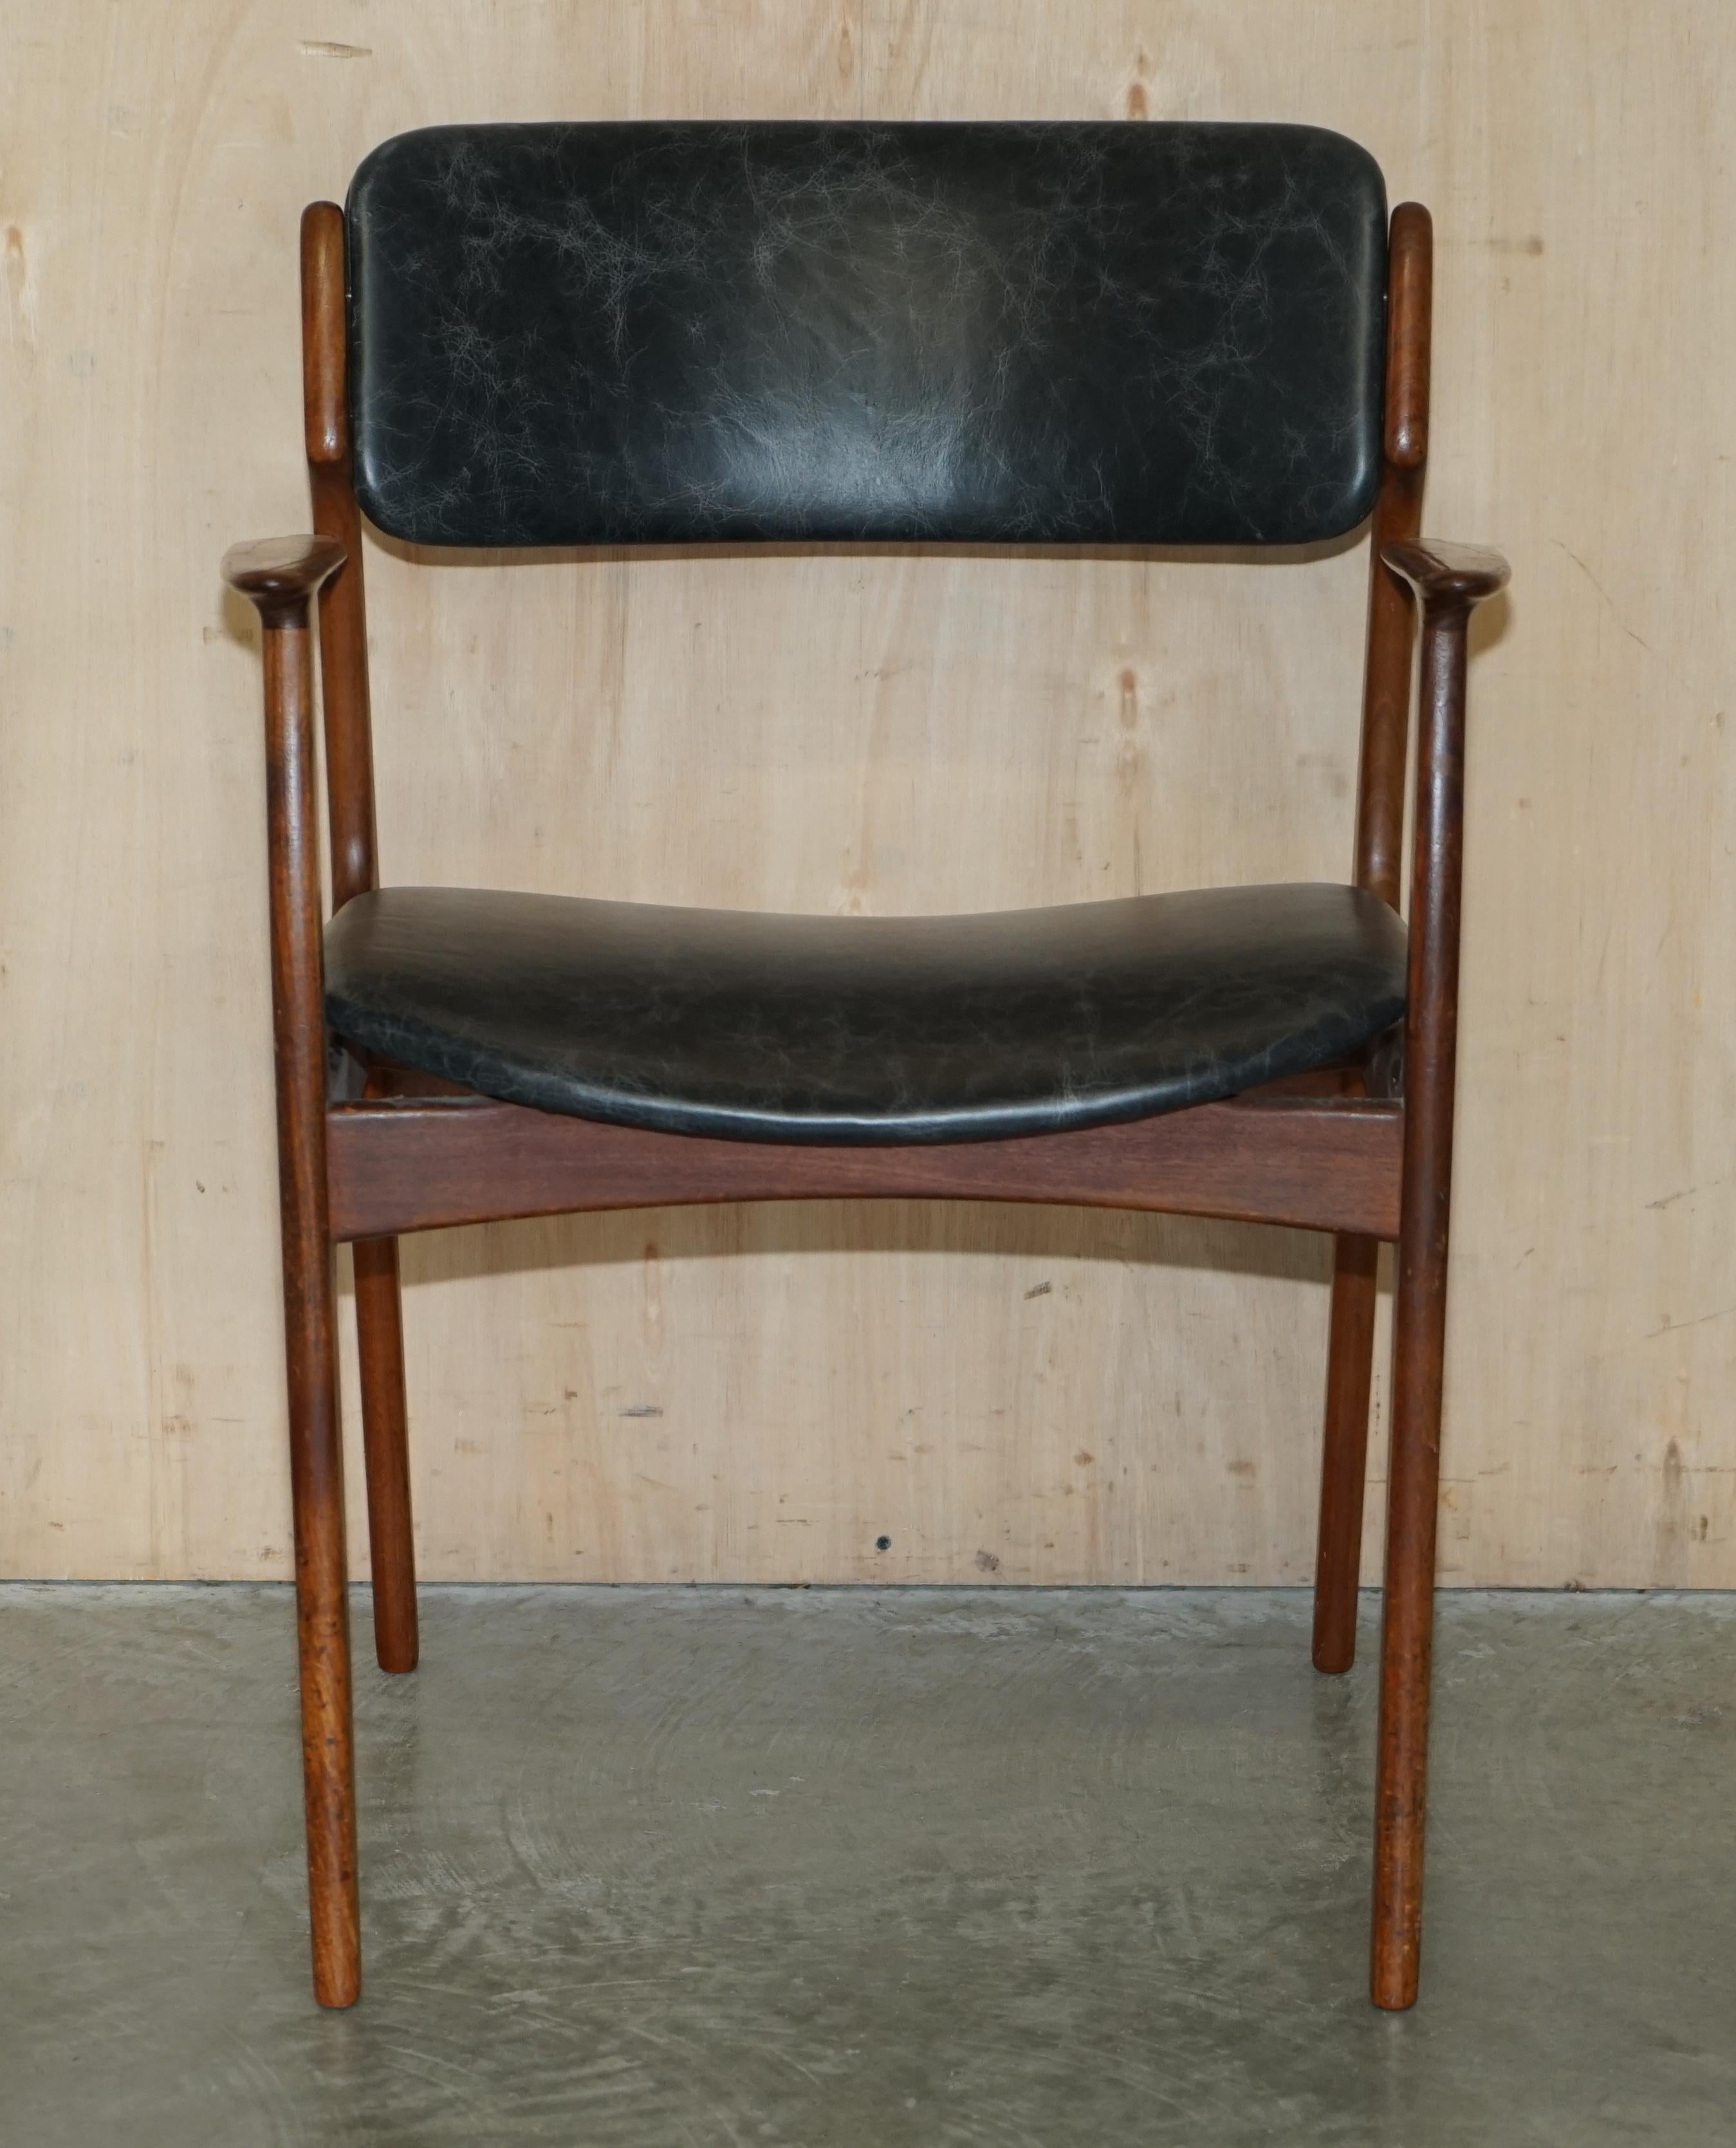 We are delighted to offer for sale this lovely original Mid Century Modern circa 1961 Peter Lovig Danish Teak office desk armchair with new heritage black leather upholstery 

Please note the delivery fee listed is just a guide, it covers within